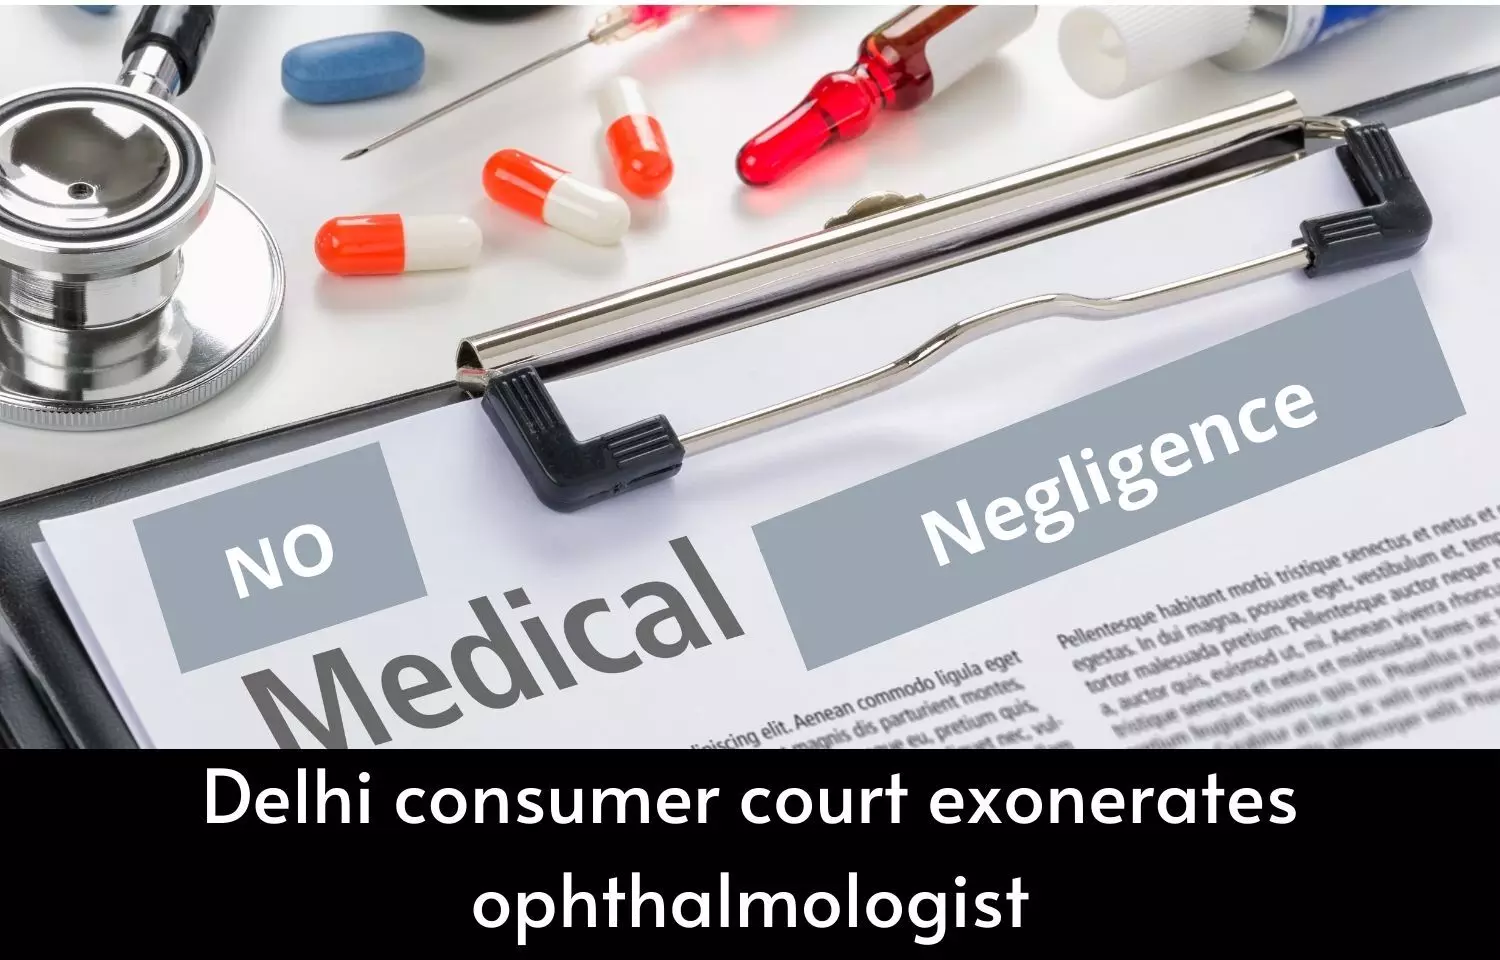 Delhi Consumer Court exonerates Ophthalmologist of medical negligence in cataract surgery